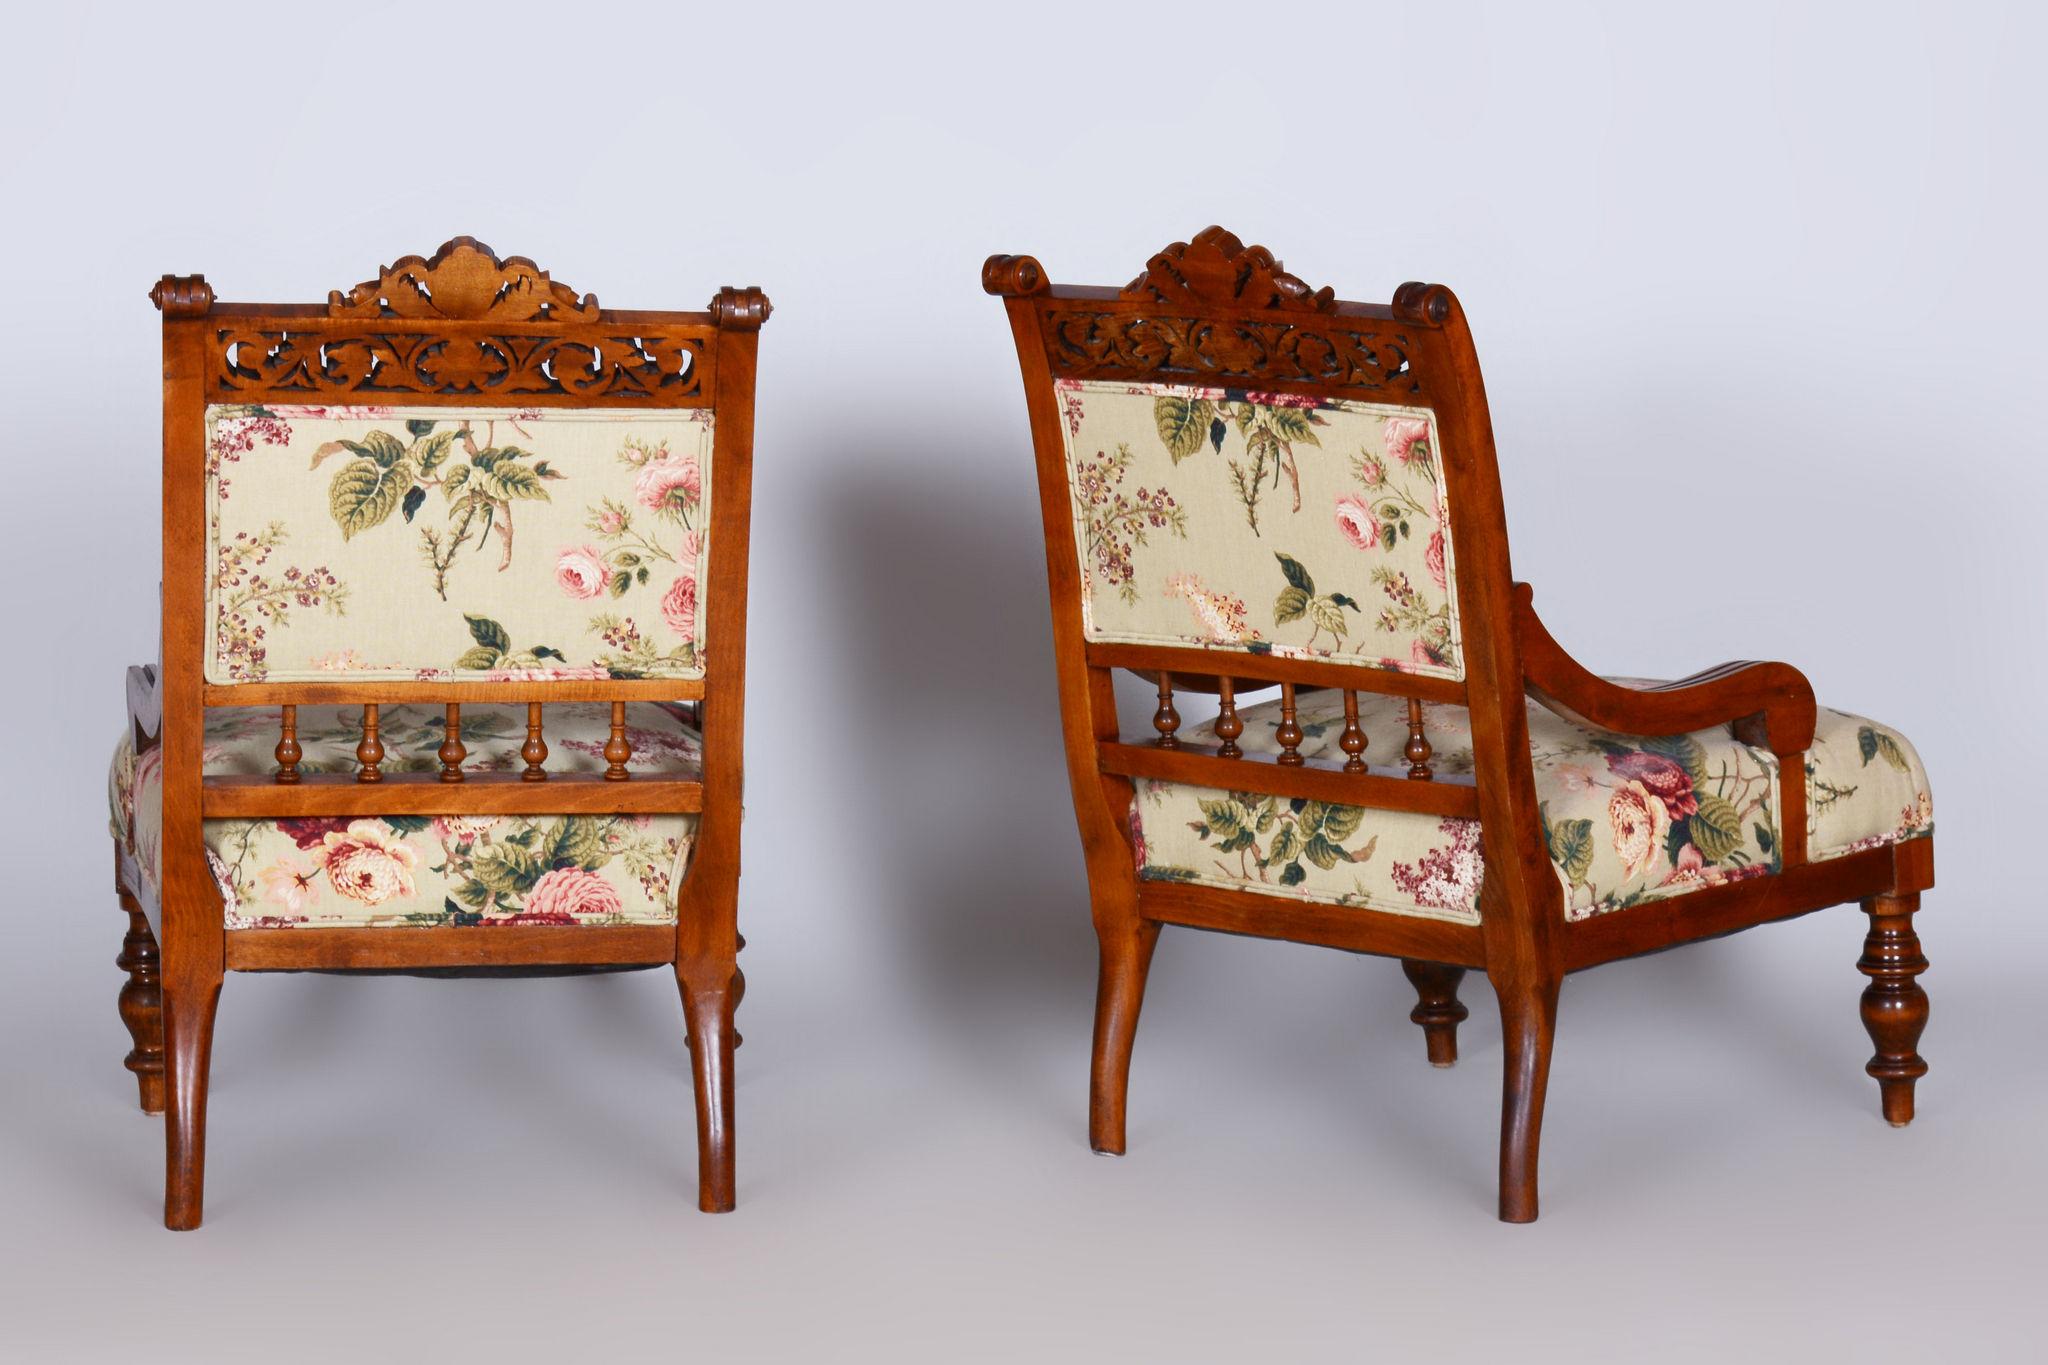 Restored Seating Set of Sofa and Six Chairs. 

Style: Historicism
Source: Czechia (Czechoslovakia)
Period: 1890-1899
Material: Beech, Walnut

According to the original process, our professional refurbishing team in Czechia has restored and